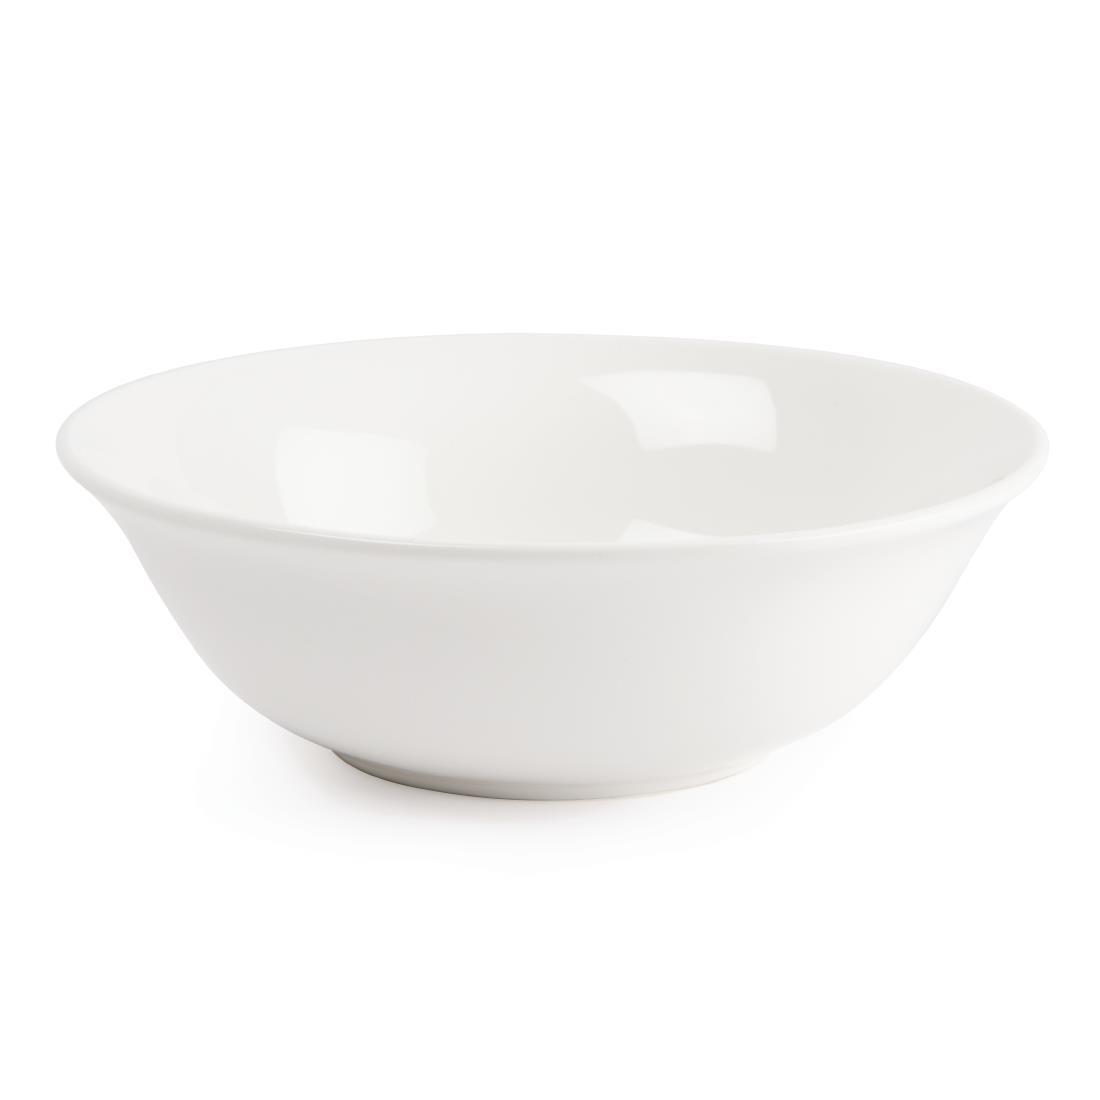 Olympia Lumina Cereal Bowls 160mm (Pack of 6) - CD638  - 2